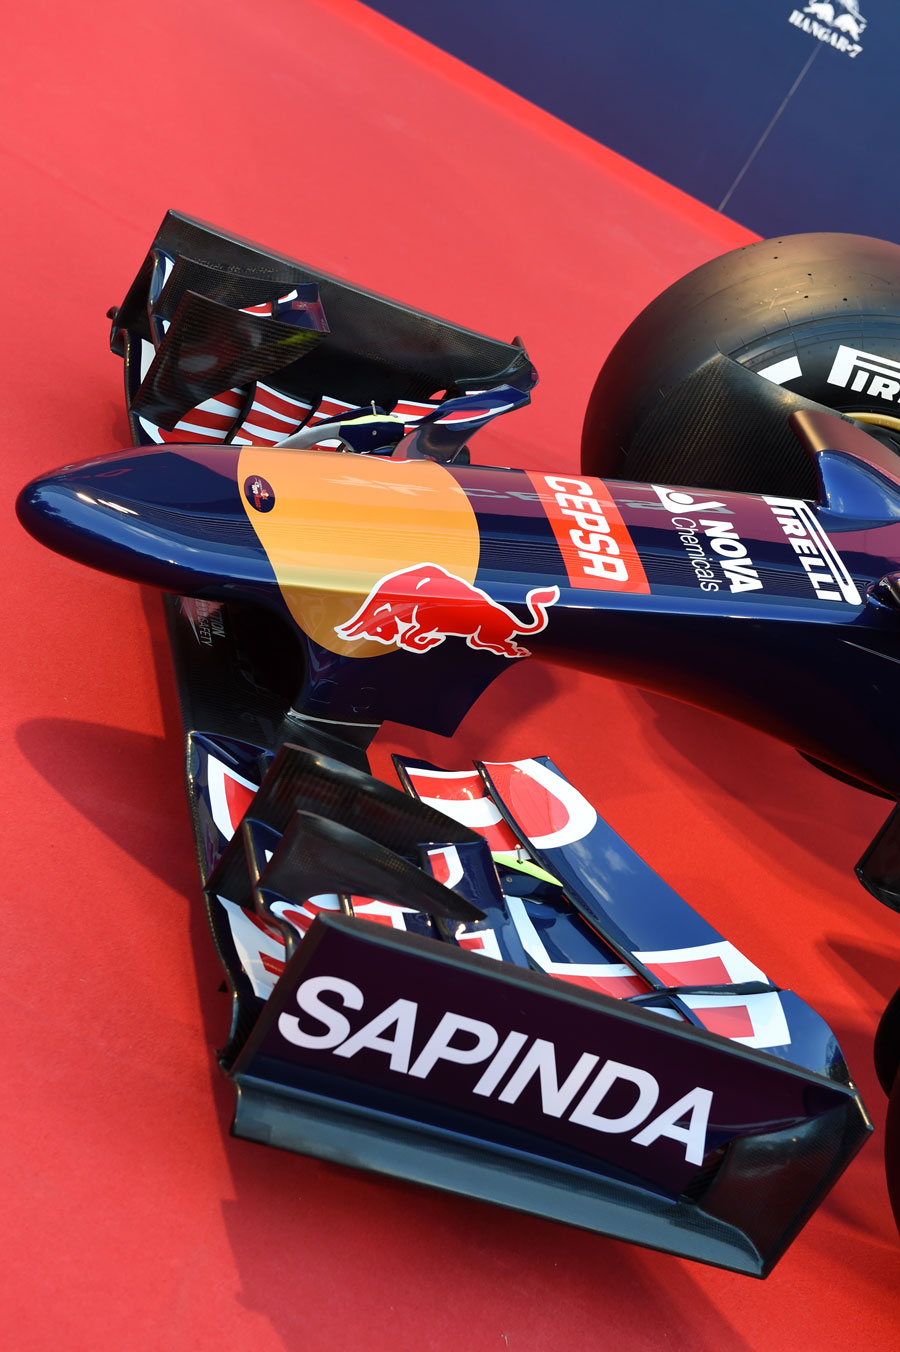 The nose and front wing of the Toro Rosso STR10